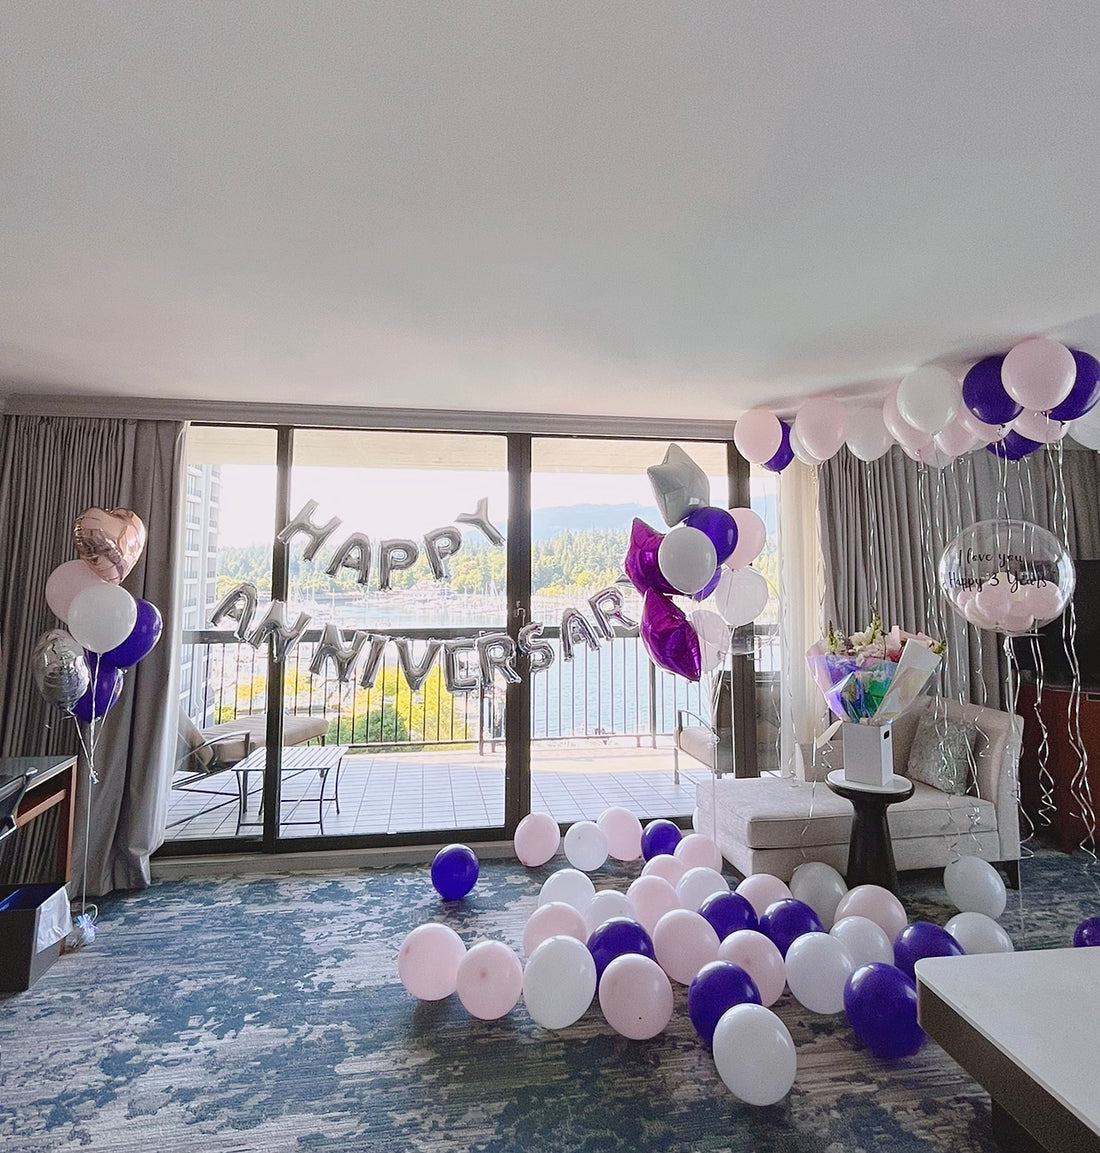 Celebrate Love in Style: One Up's Exquisite Anniversary Decoration at The Westin Bayshore Hotel Vancouver